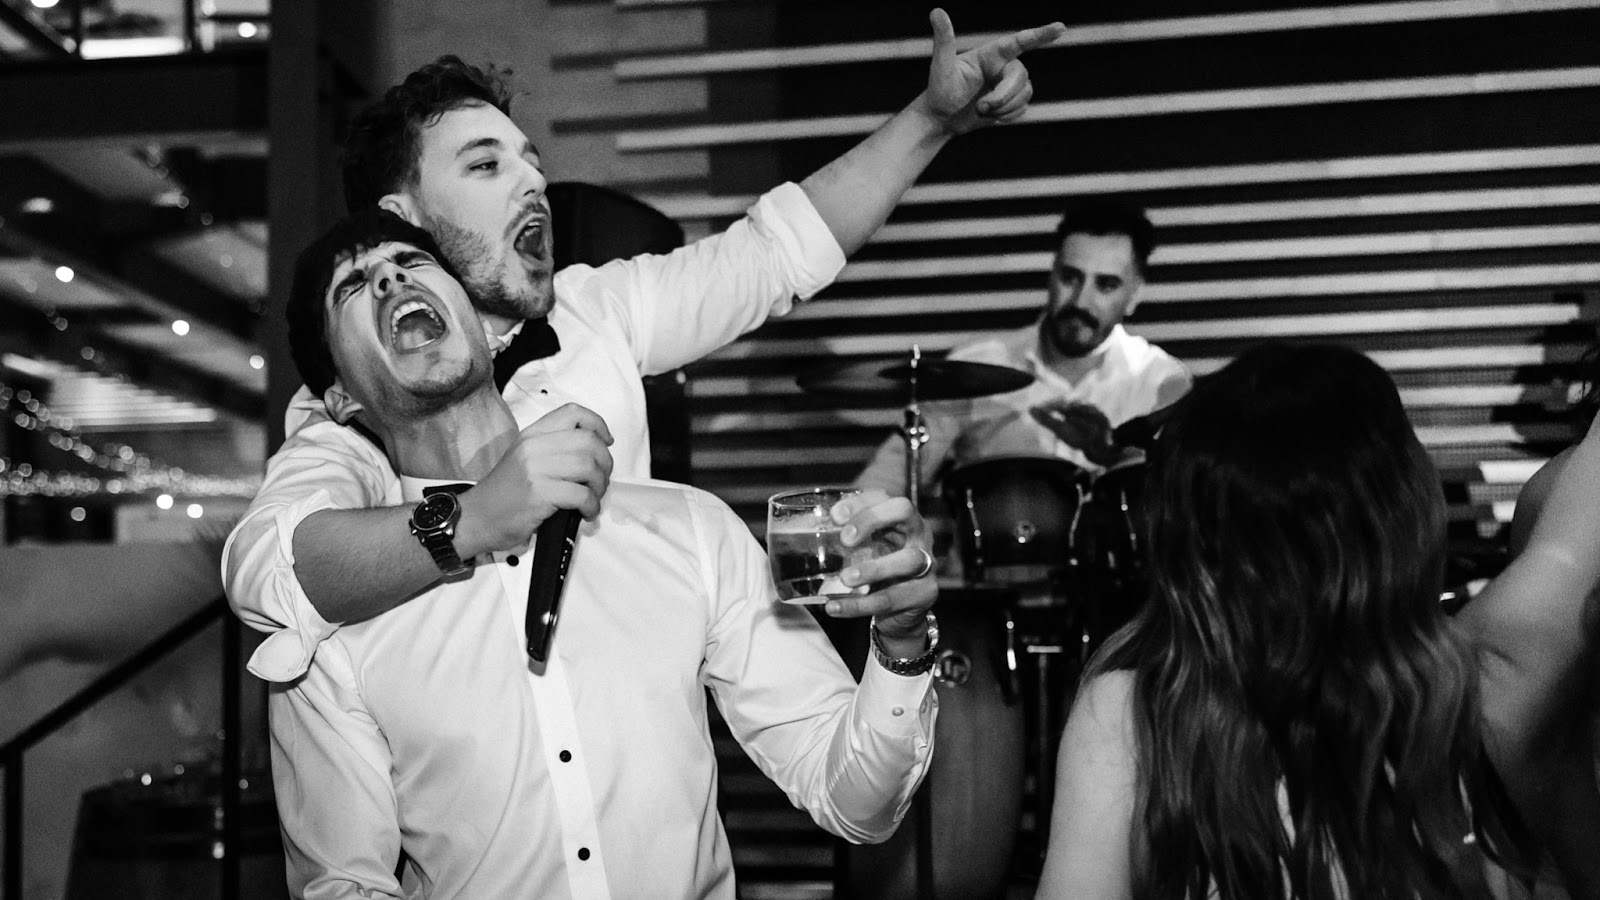 Groom and best man on the dance-floor captured with a documentary-style wedding photography at National Wine Center Adelaide